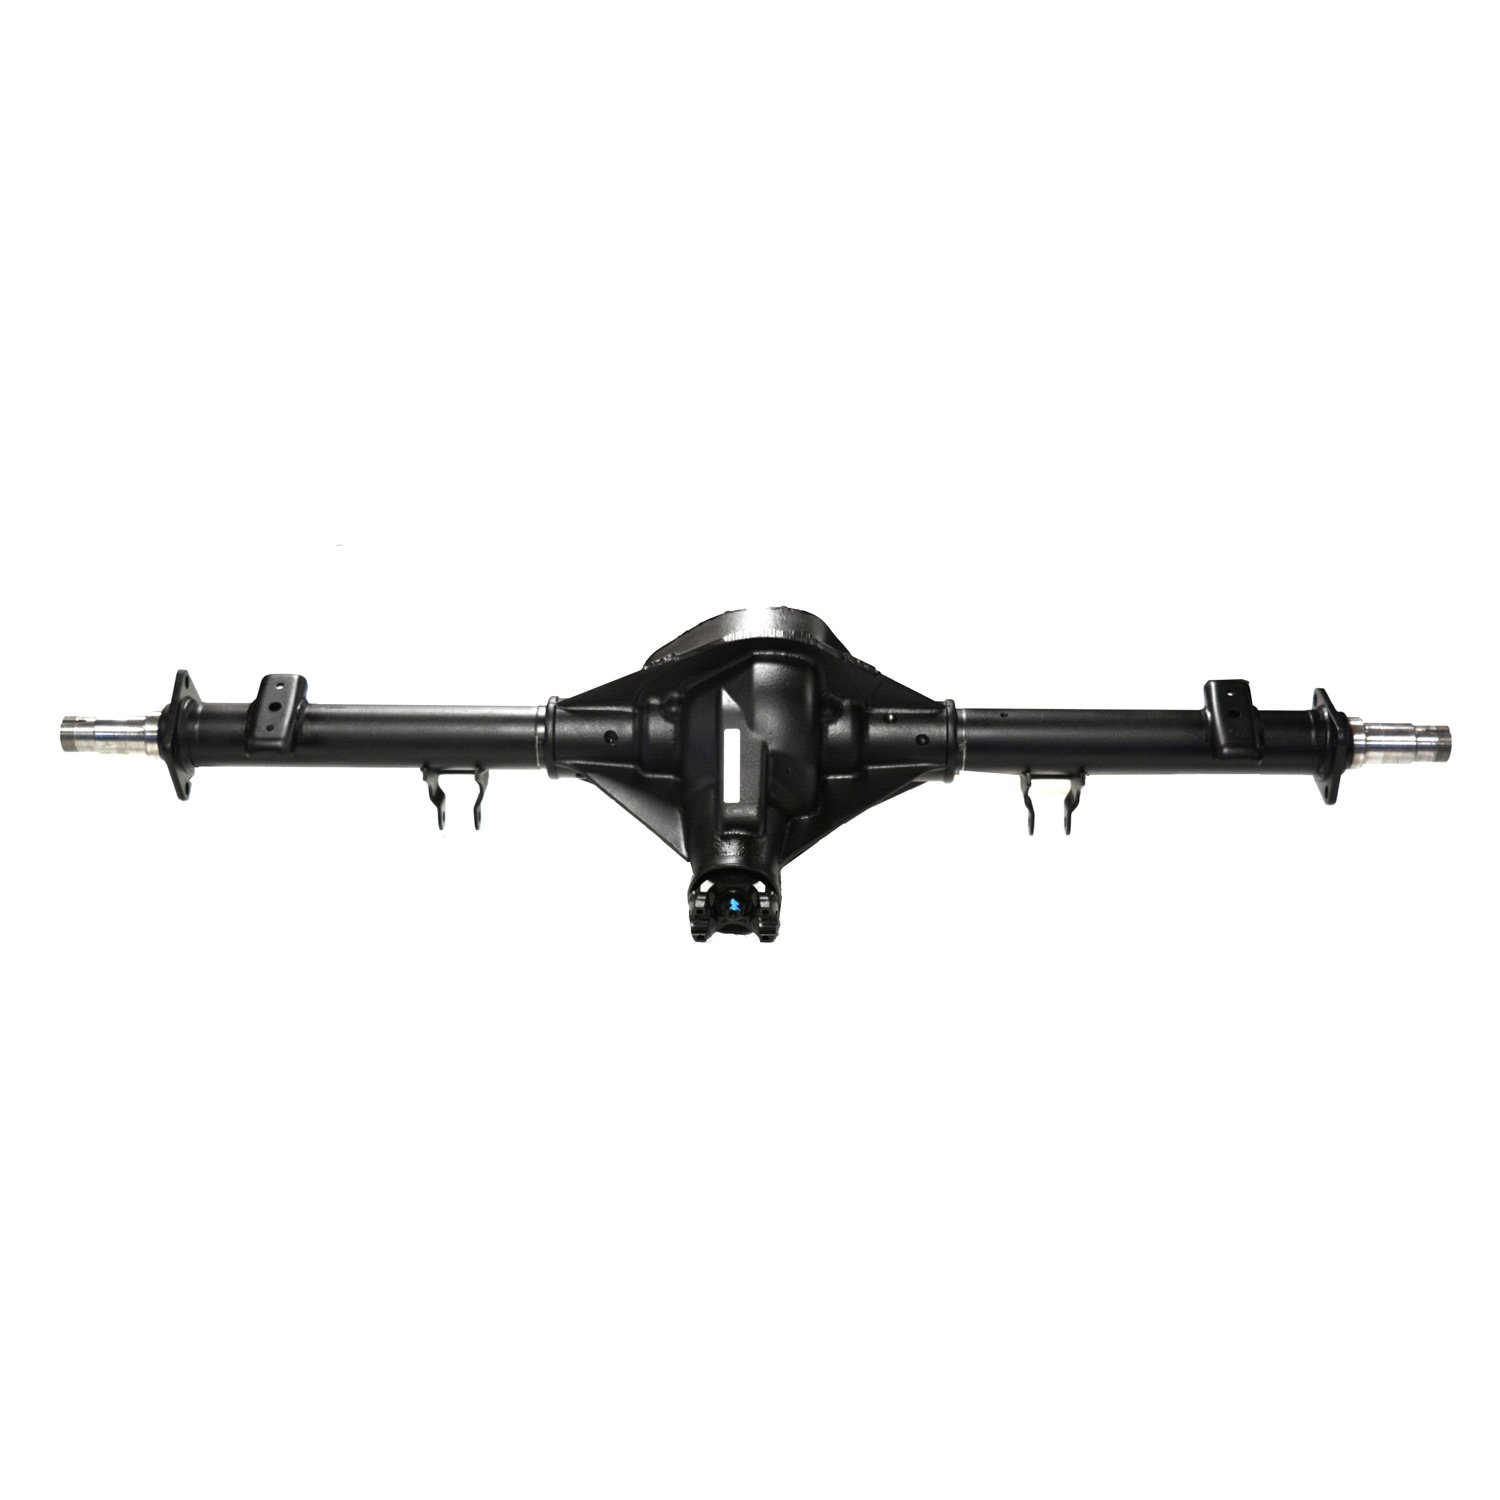 Remanufactured Complete Axle Assembly for Dana 70 03-09 GM Van 3500 3.73 , SRW, Cutaway